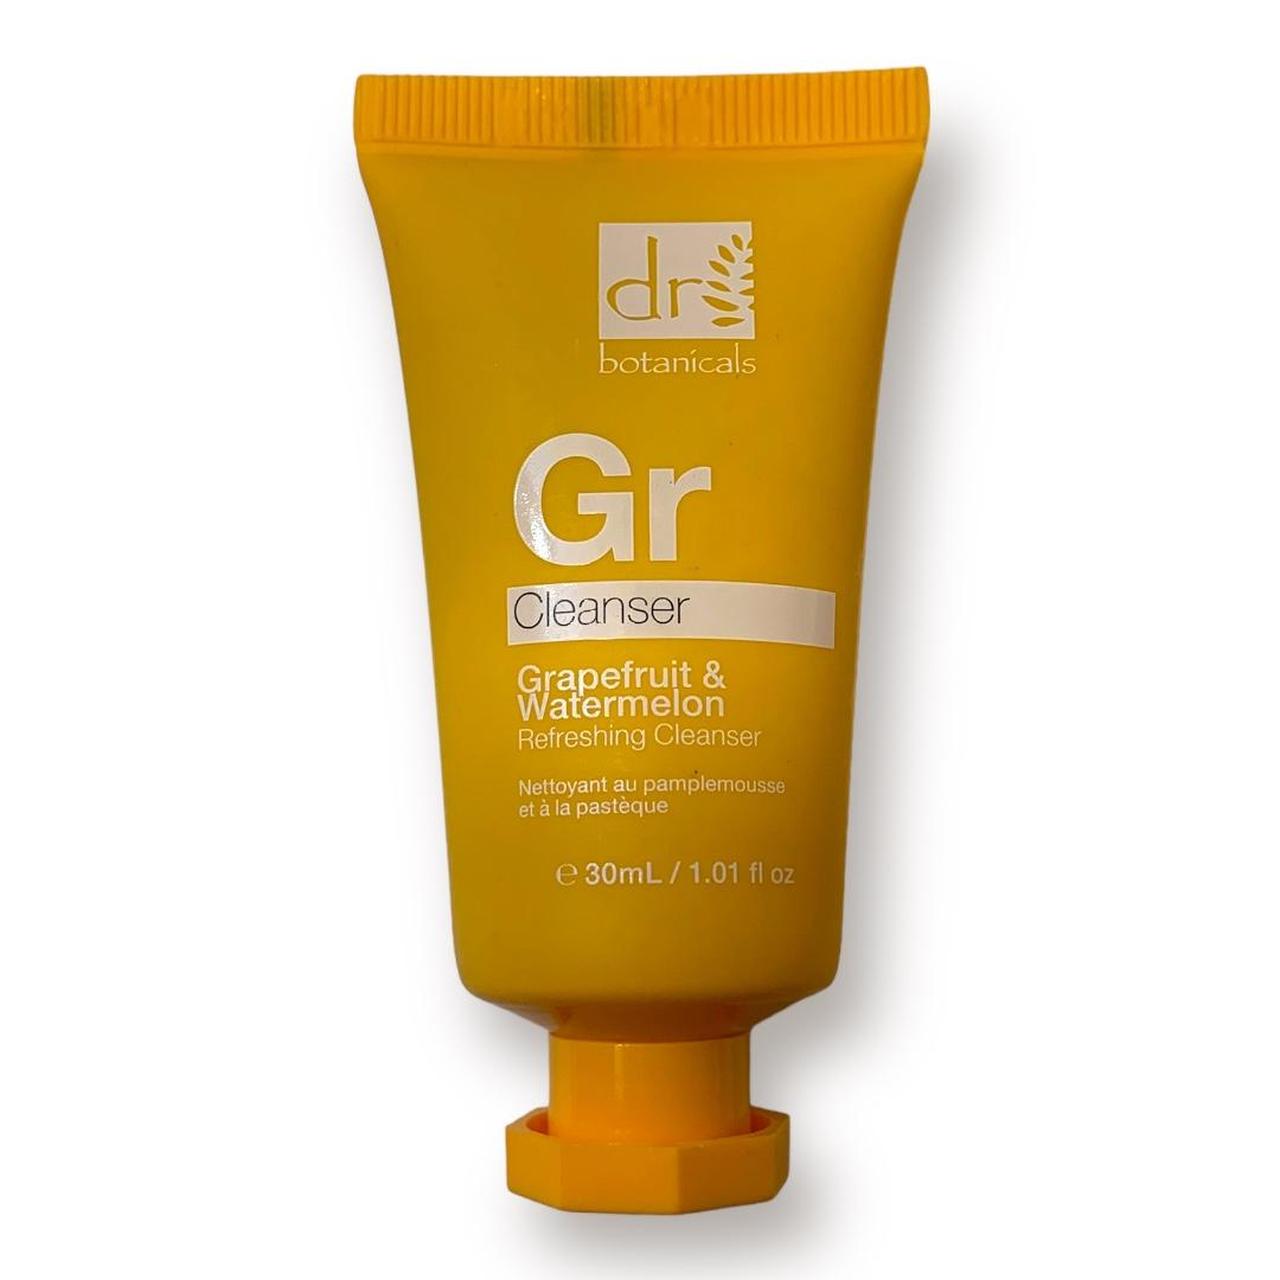 Dr Botanicals Yellow and White Skincare (2)